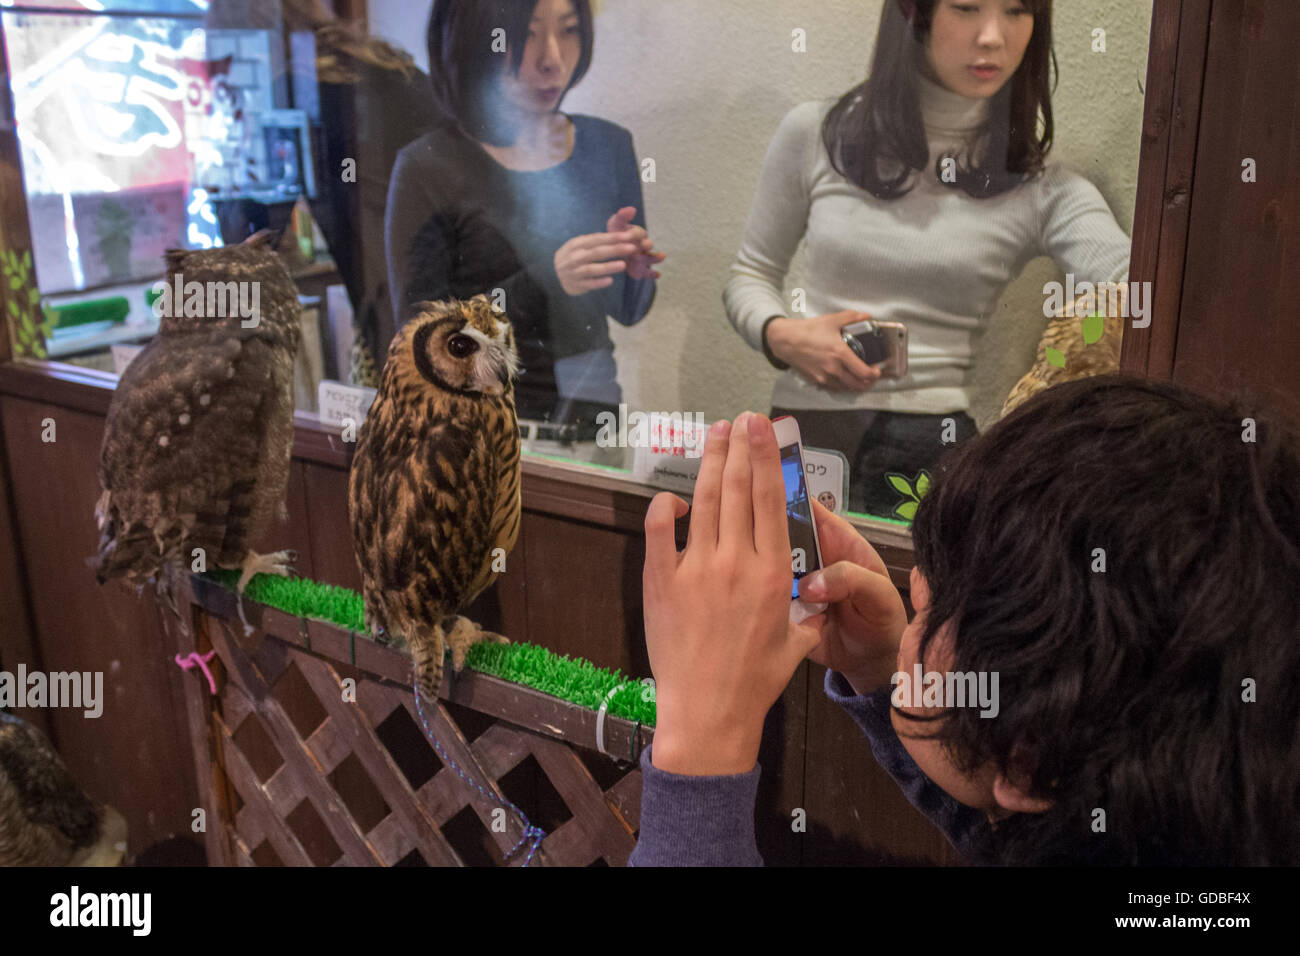 Japanese visitors take pictures of owls in Tokyo owl cafe. Stock Photo